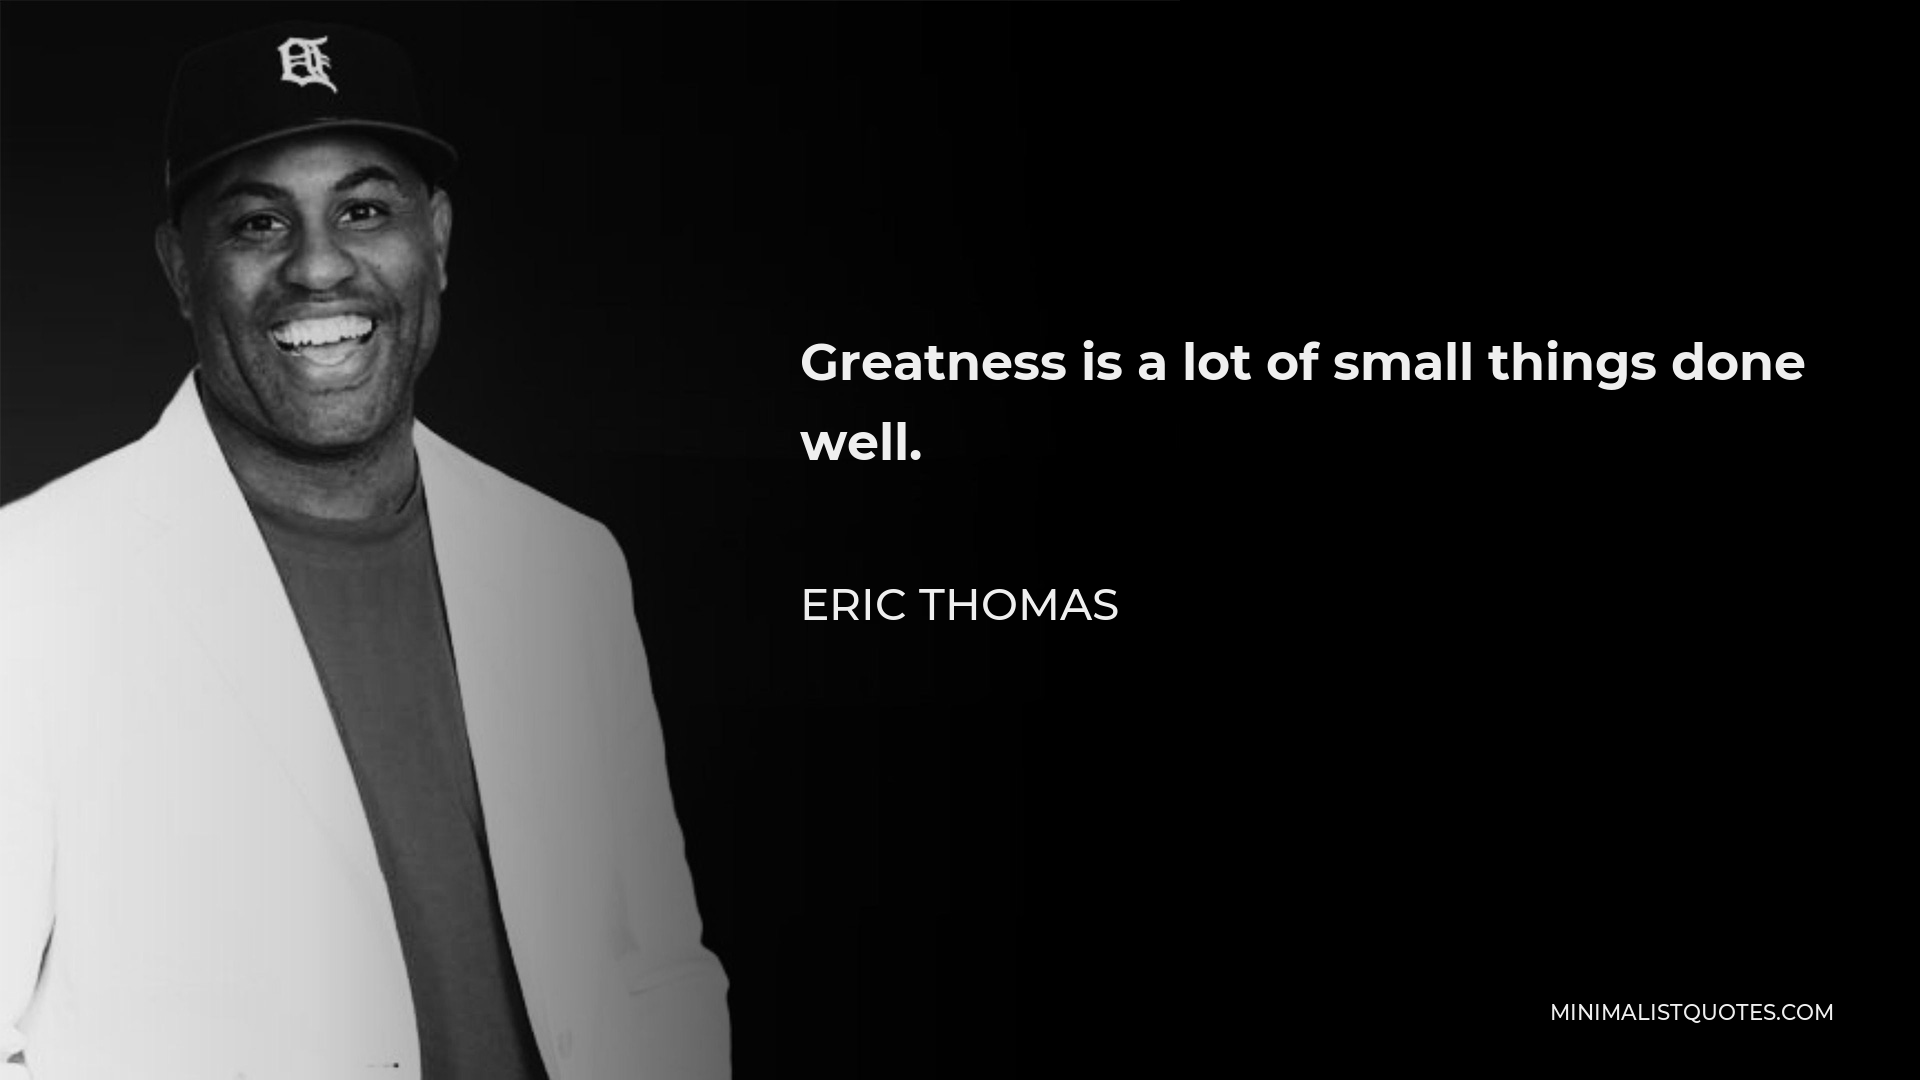 Eric Thomas Quote - Greatness is a lot of small things done well.